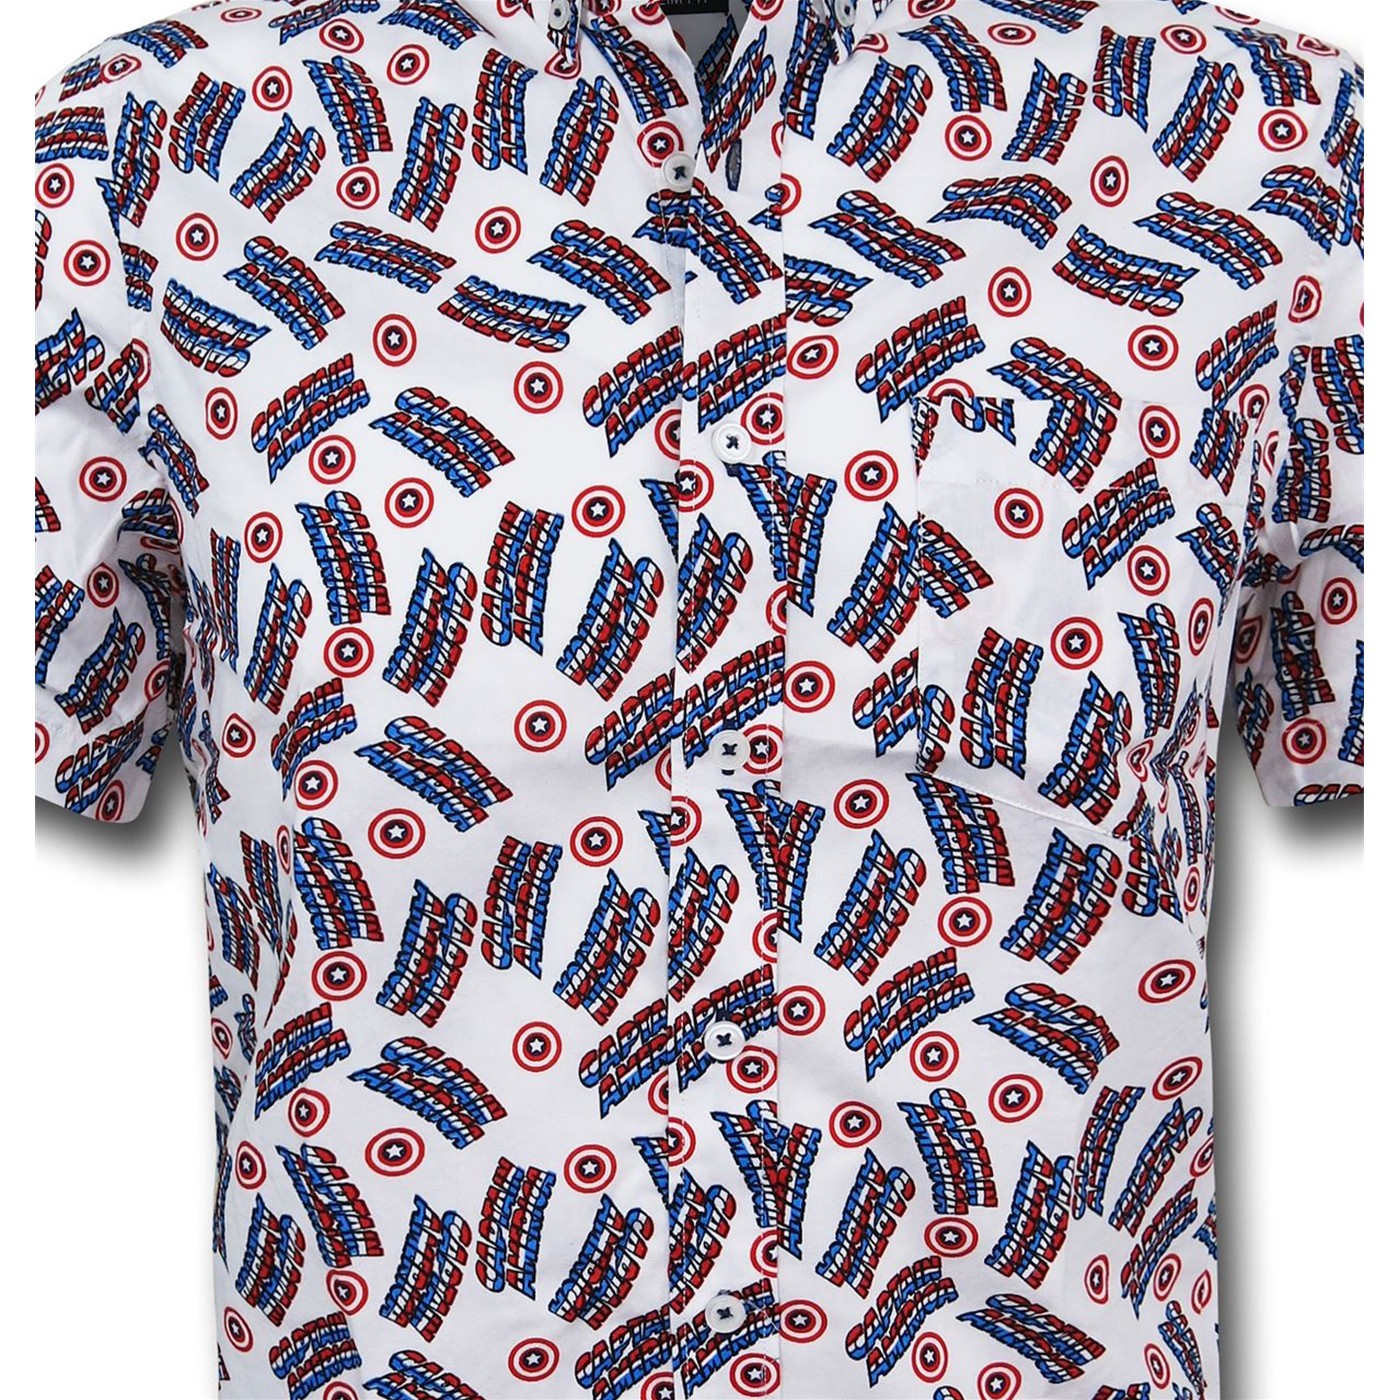 Captain America Logos Men's Fitted Button Down Shirt